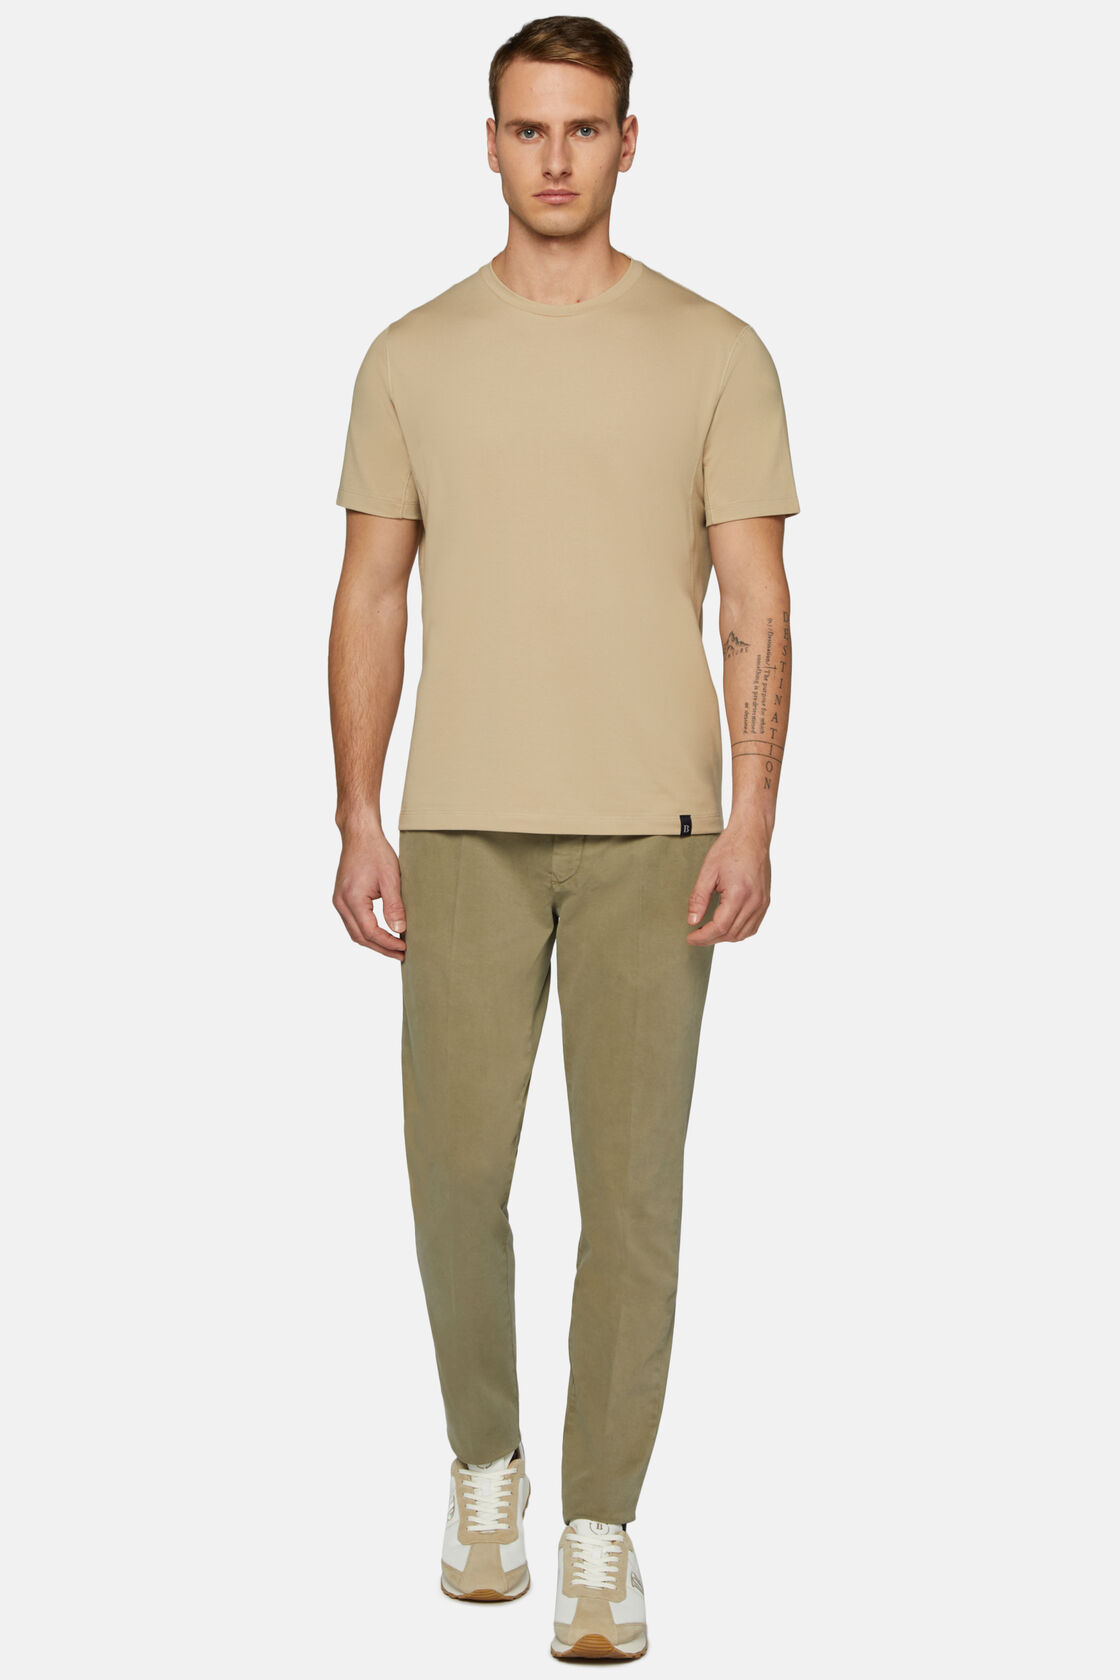 T-Shirt in Sustainable Performance Pique, Beige, hi-res